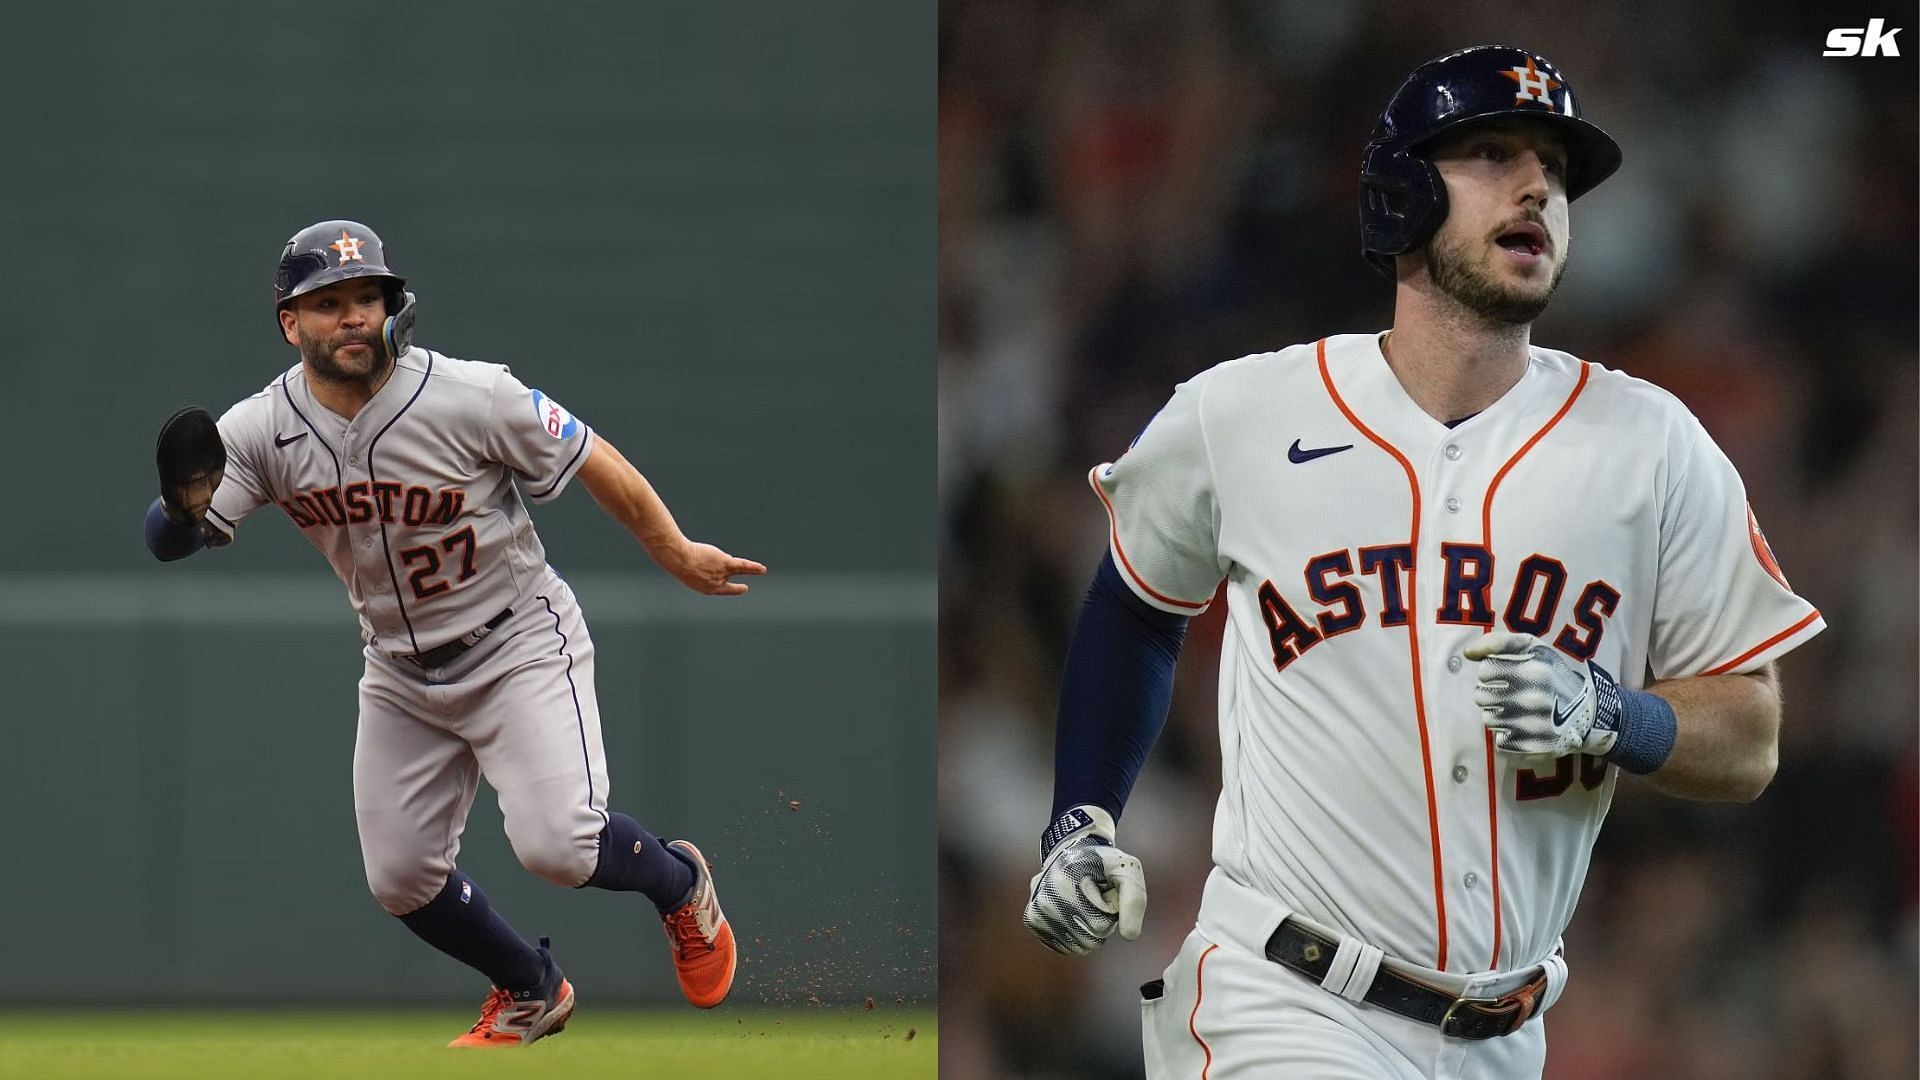 Jose Altuve was all praises for Kyle Tucker after the Astros right fielder had an impressive outing against the Angels.